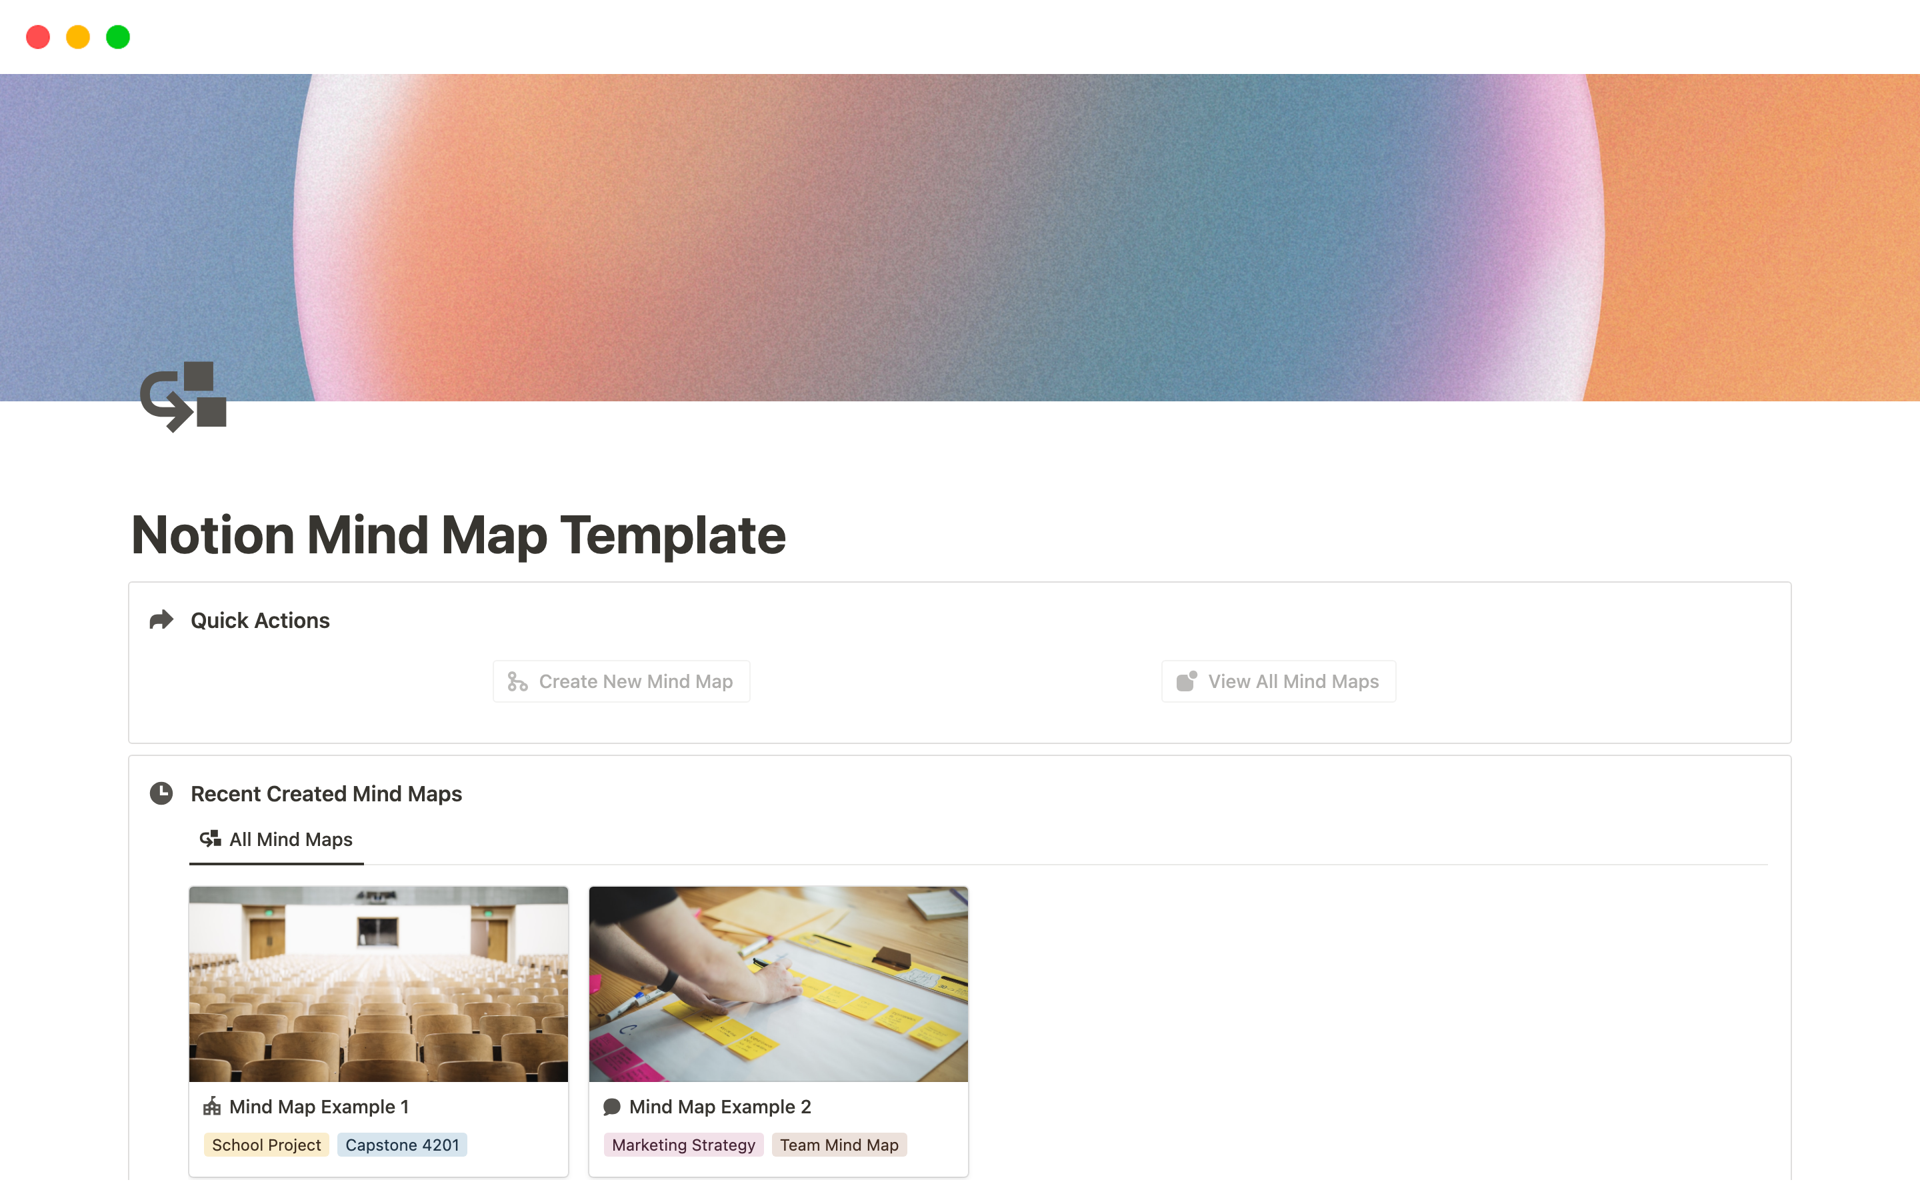 Introducing the 1st Notion Mind Map Template: an intuitive, dynamic solution for brainstorming, planning, and visualizing ideas seamlessly within the Notion ecosystem.